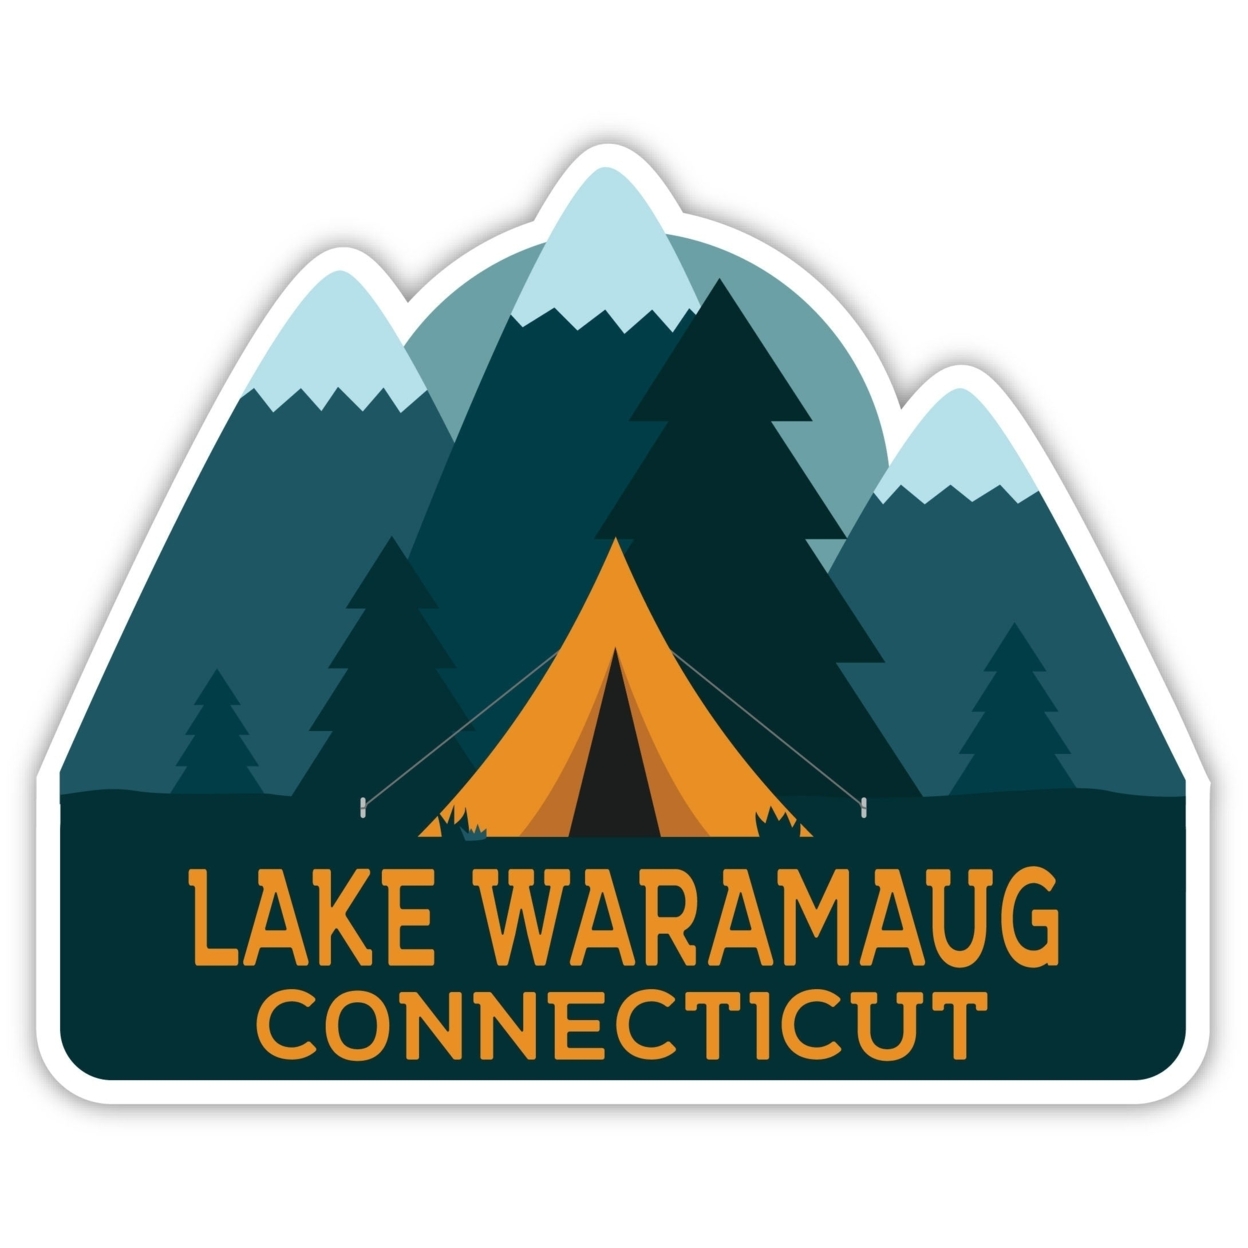 Lake Waramaug Connecticut Souvenir Decorative Stickers (Choose Theme And Size) - 2-Inch, Tent